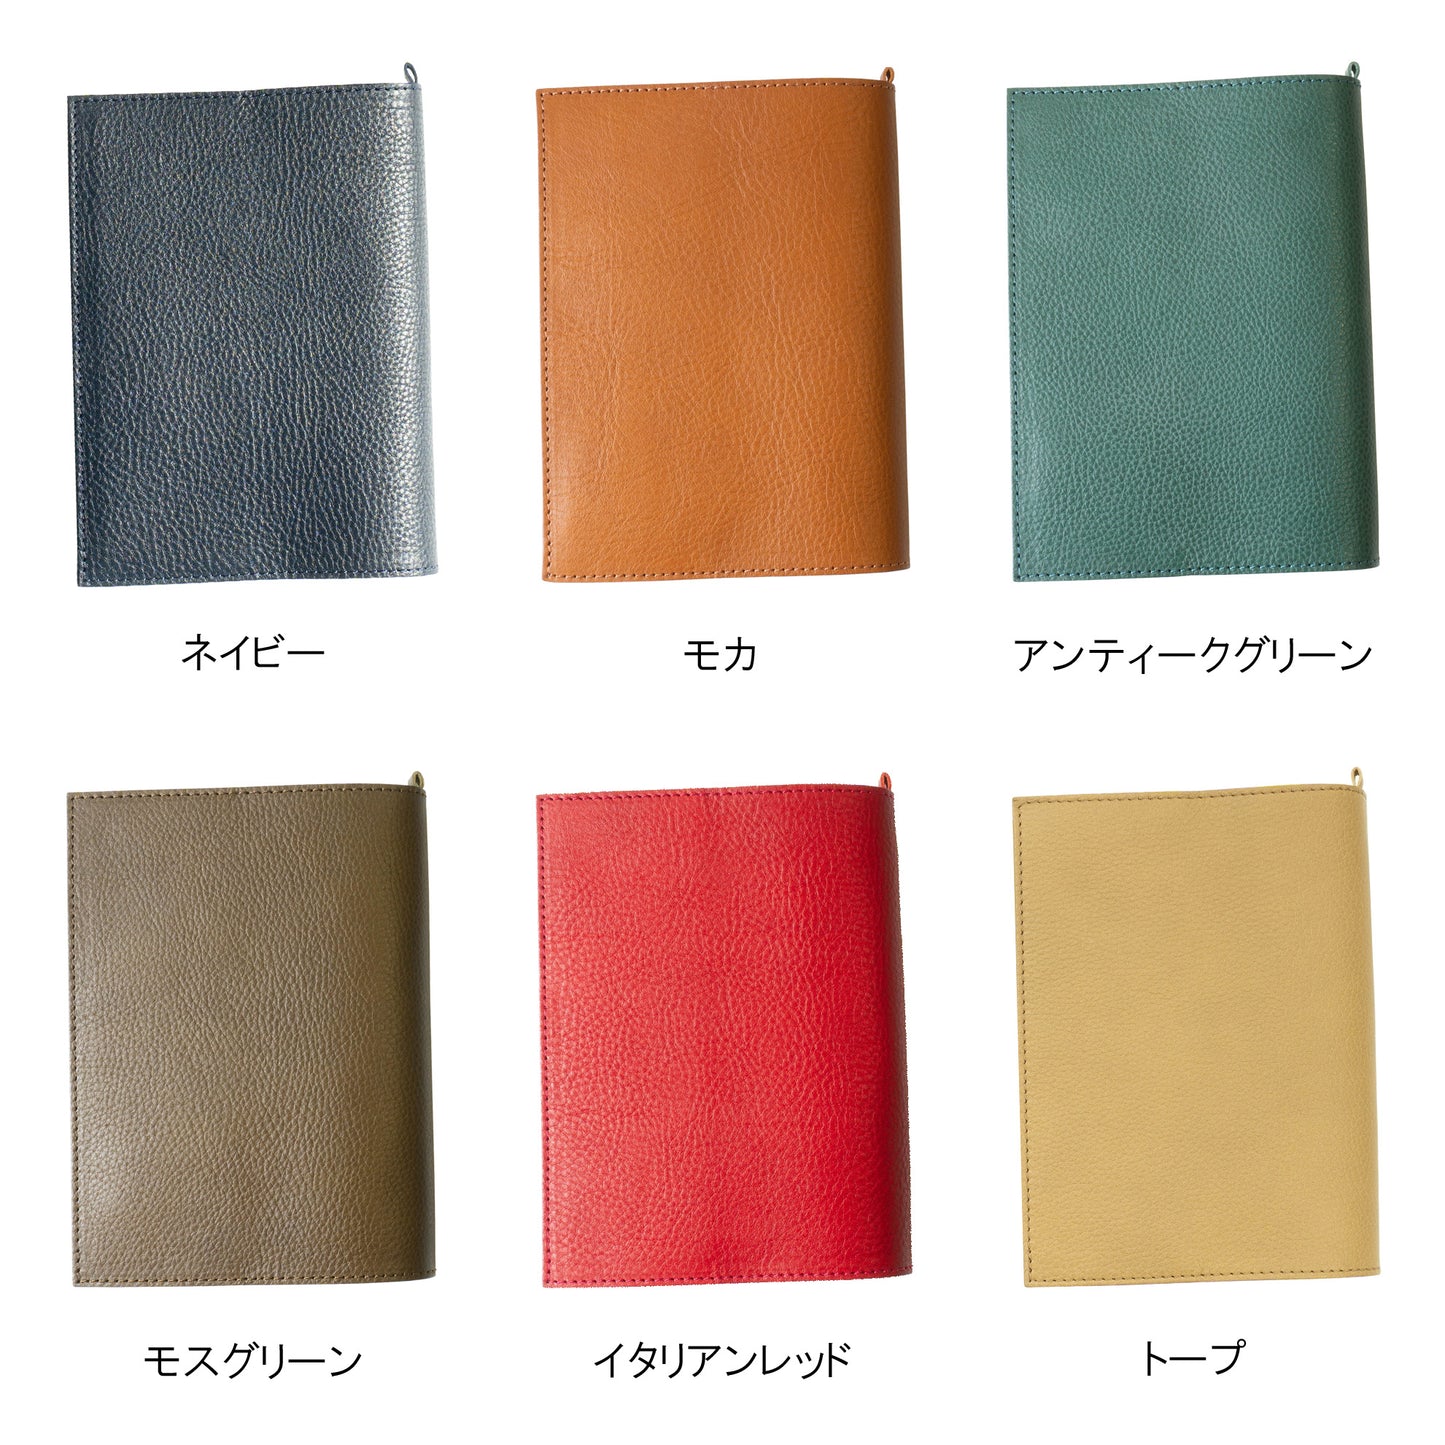 [Japanese Craftsman Made / Antique] Book Cover A6 Genuine leather Italian leather